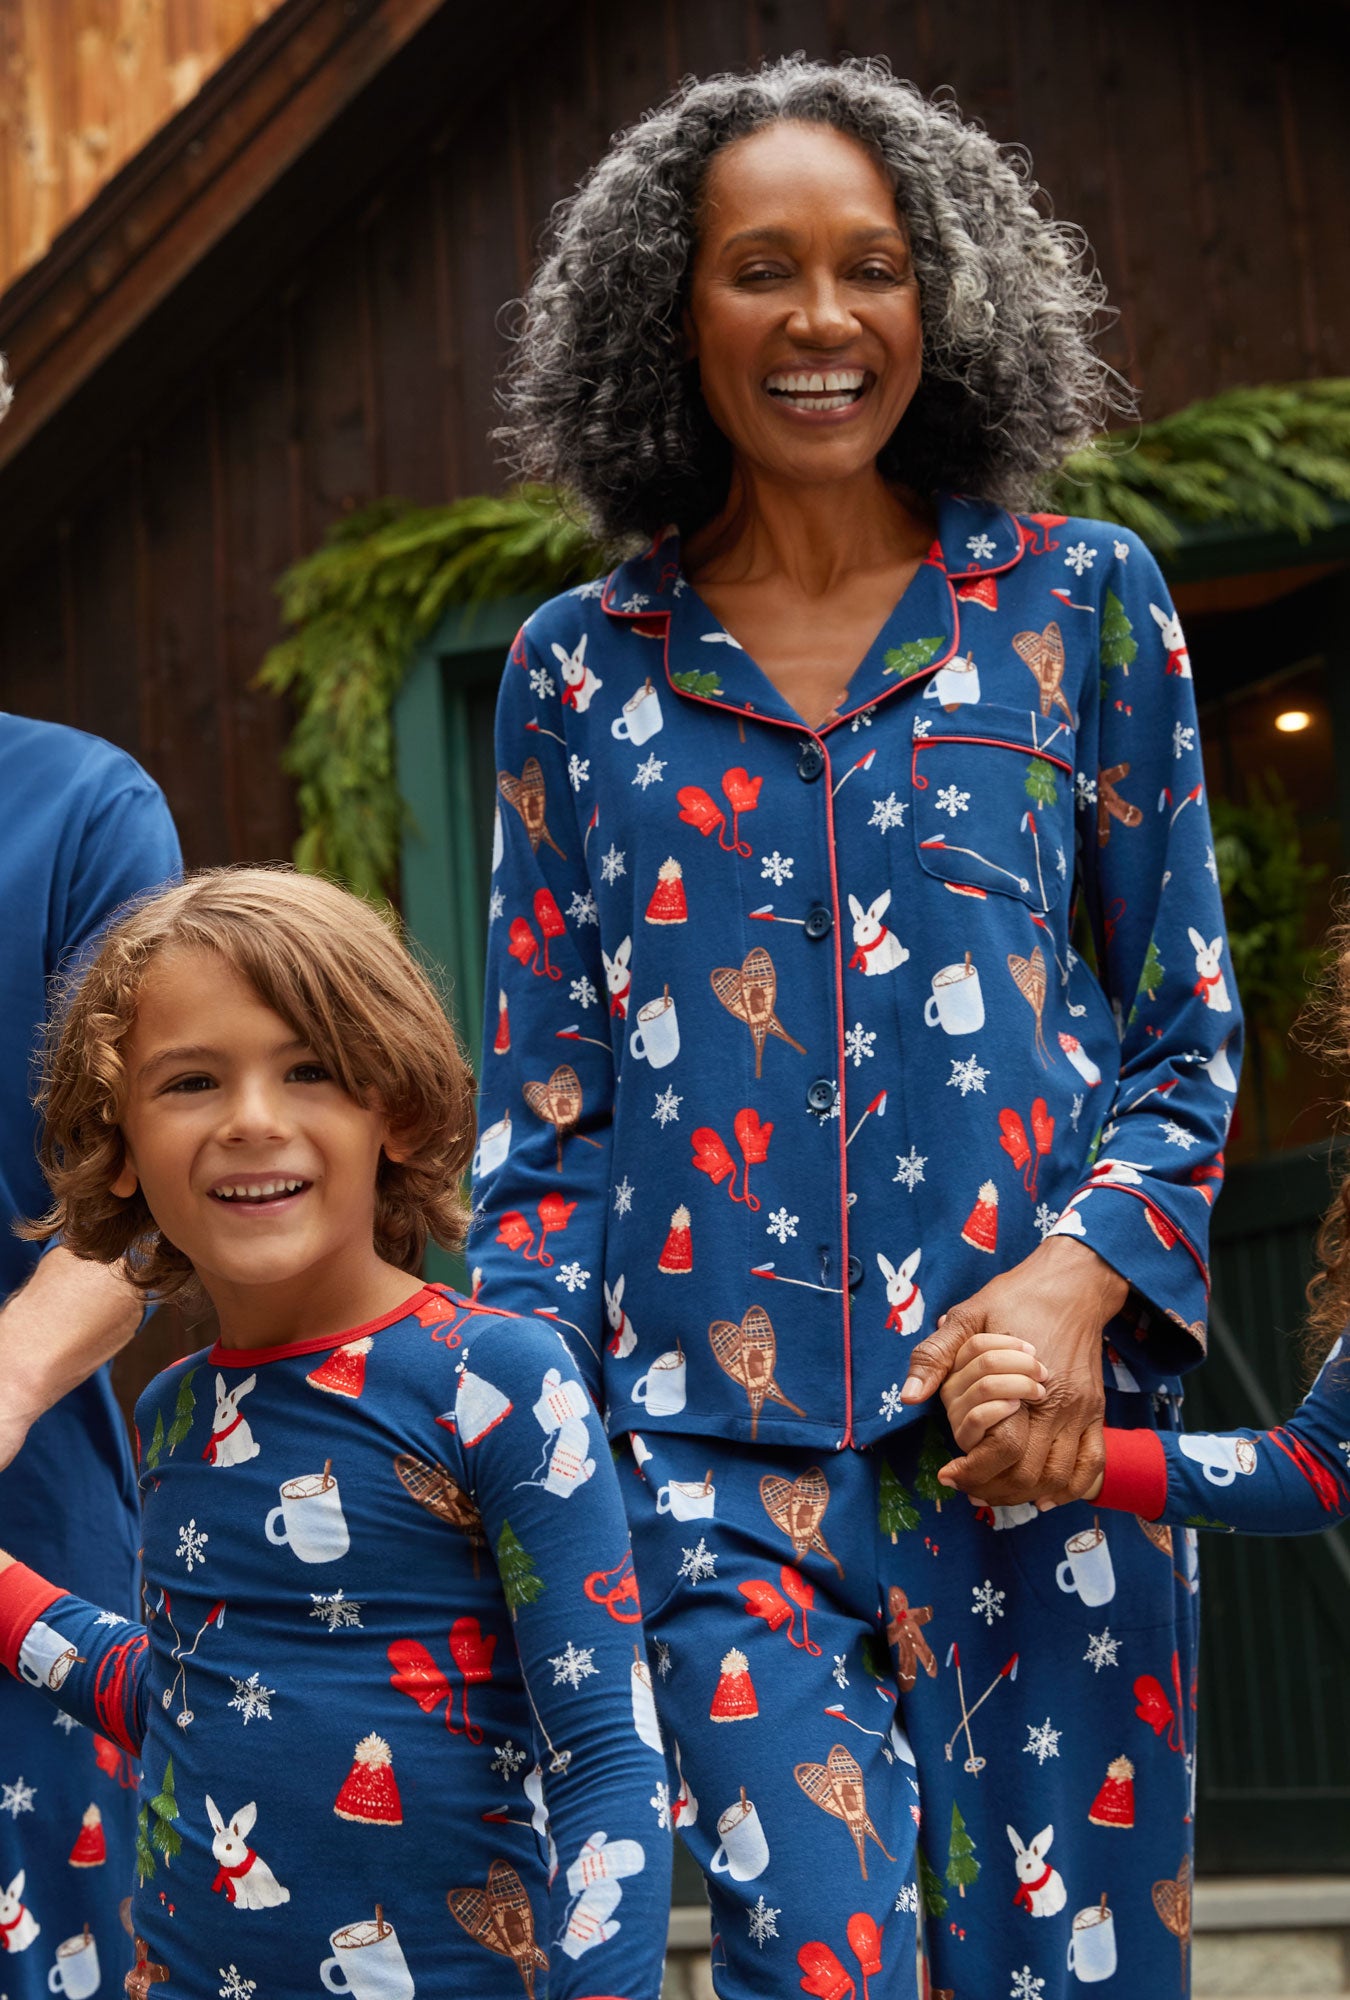 A lady wearing navy long sleeve classic stretch jersey pj set with seasonal delights print.